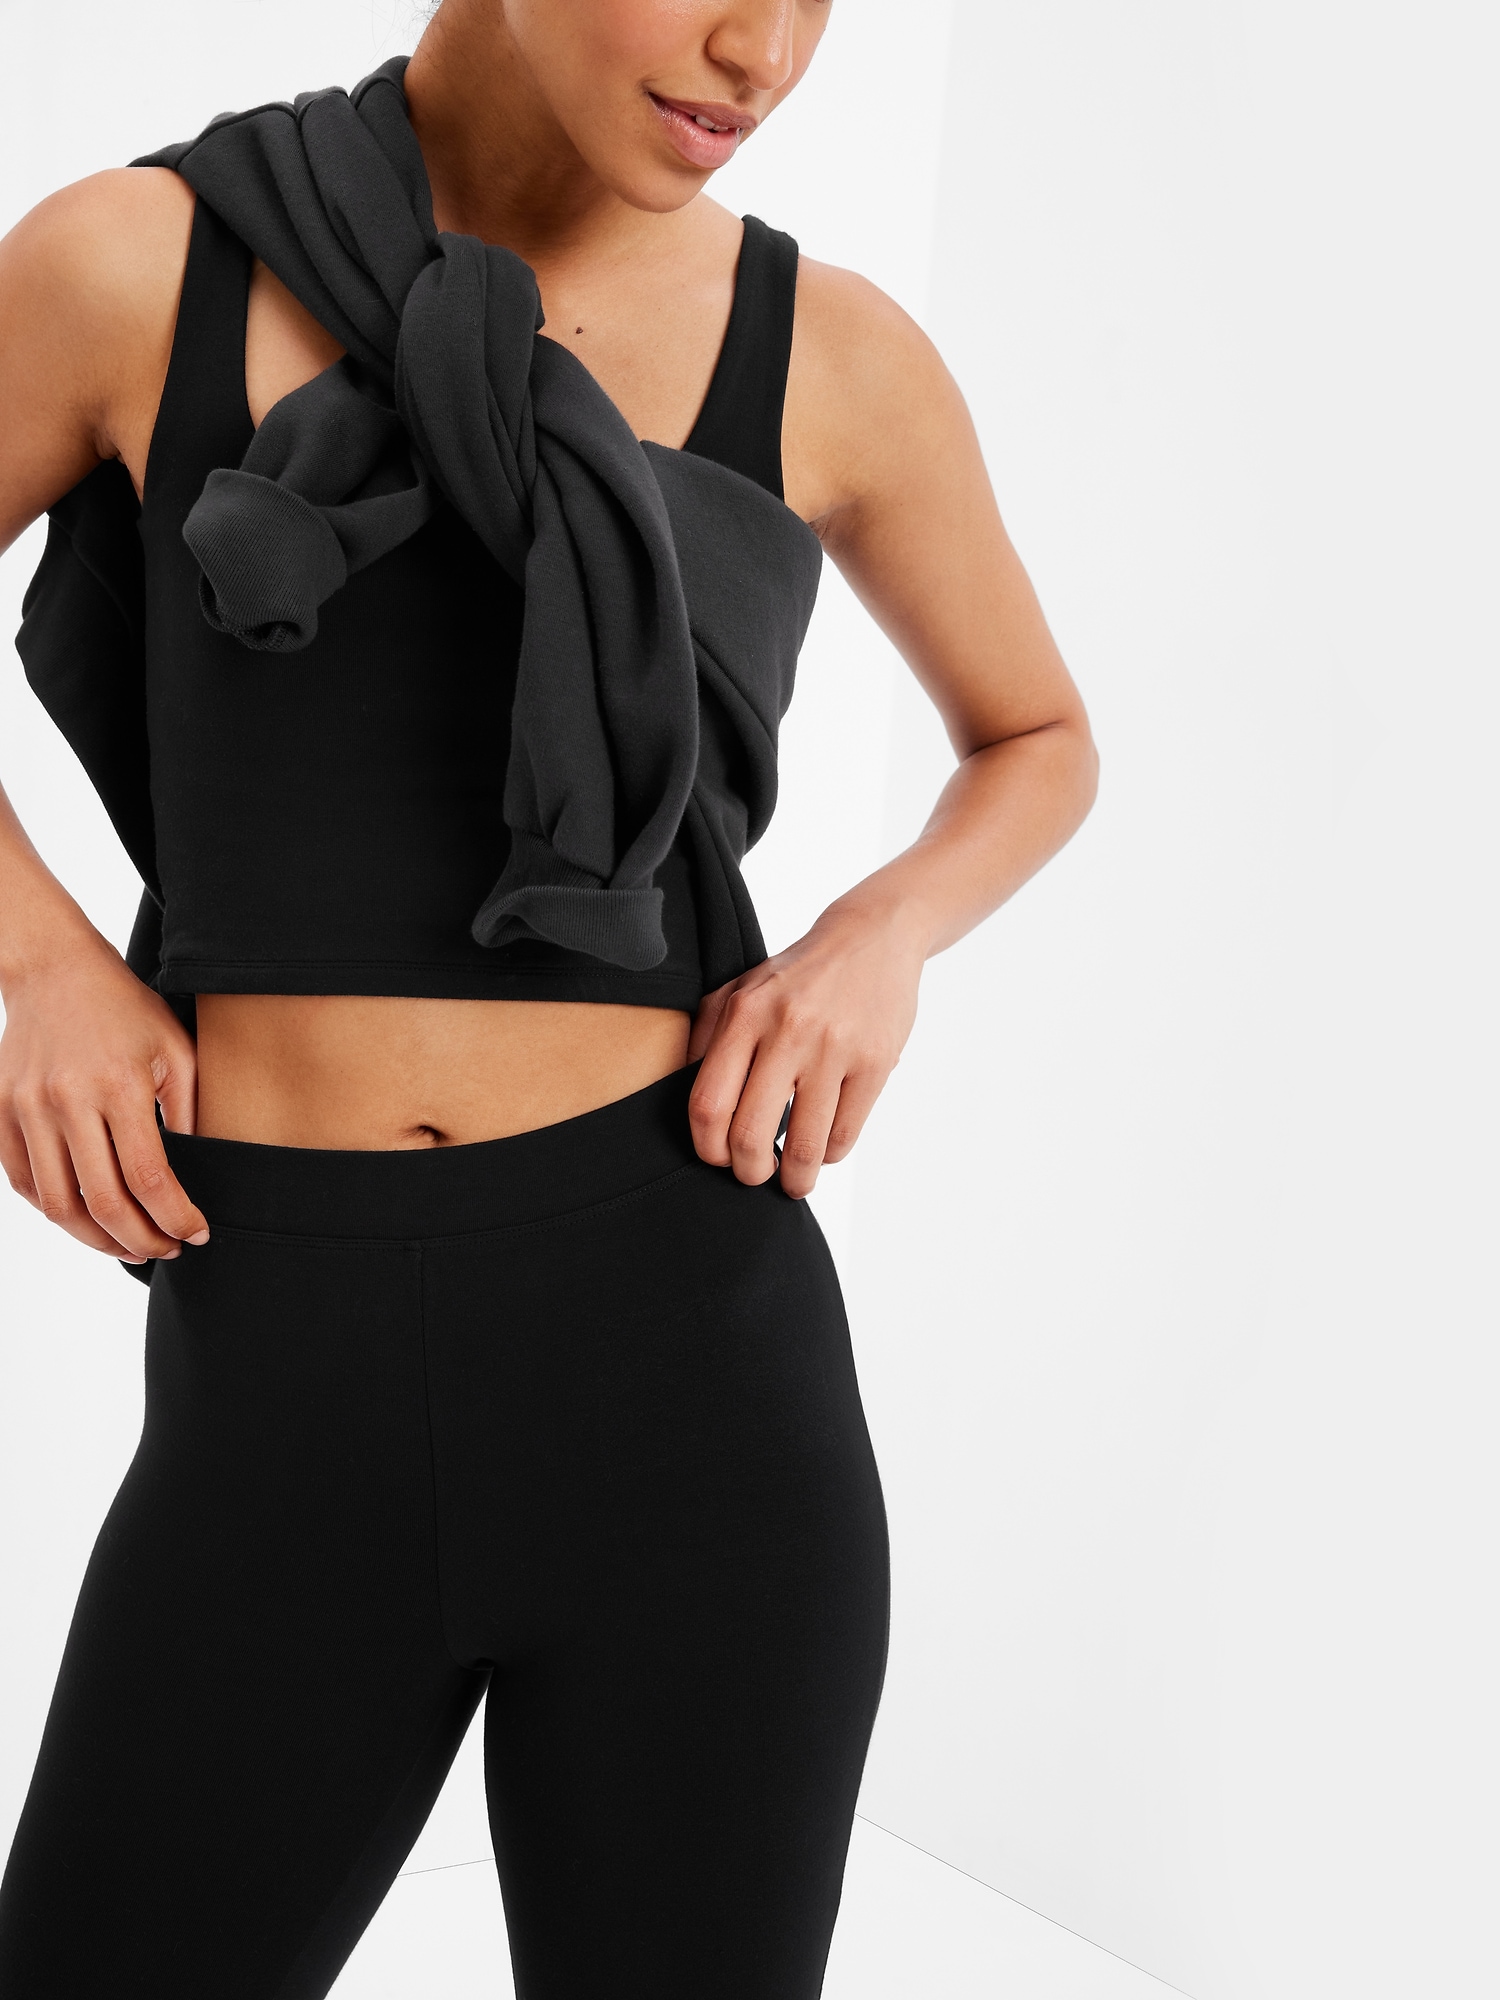 Ring in the new year in GapFit's best styles. Shop activewear